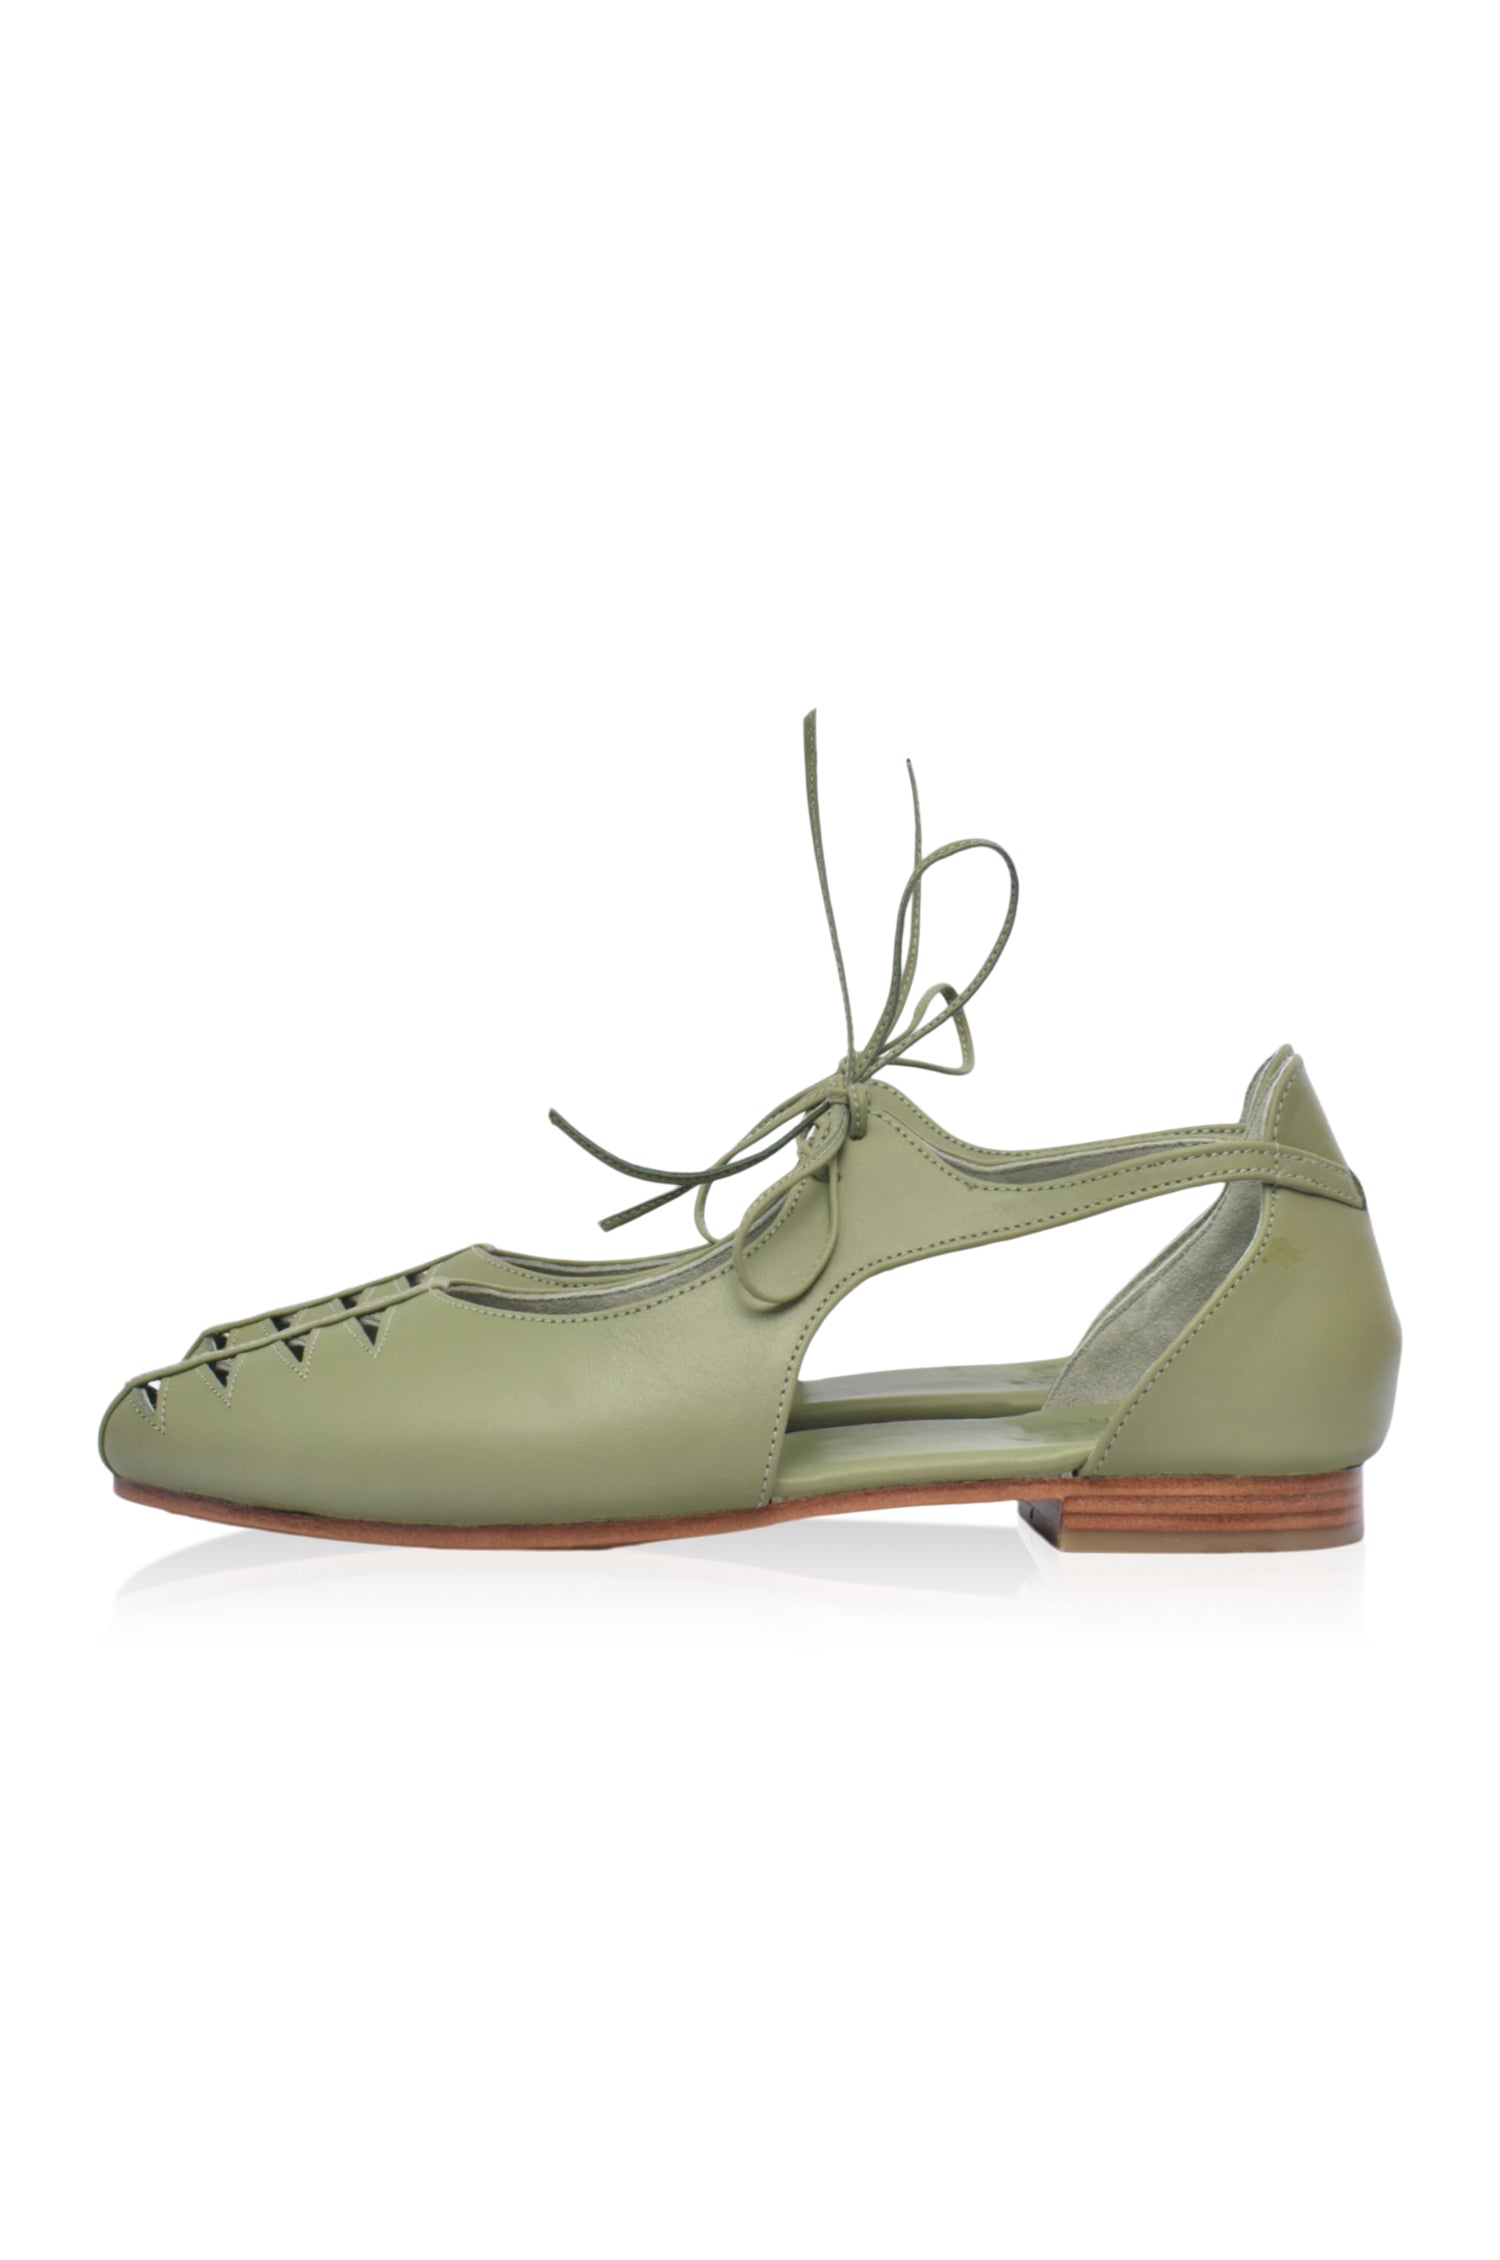 Eden Pointy Toe Ballet Flats in Olive Green